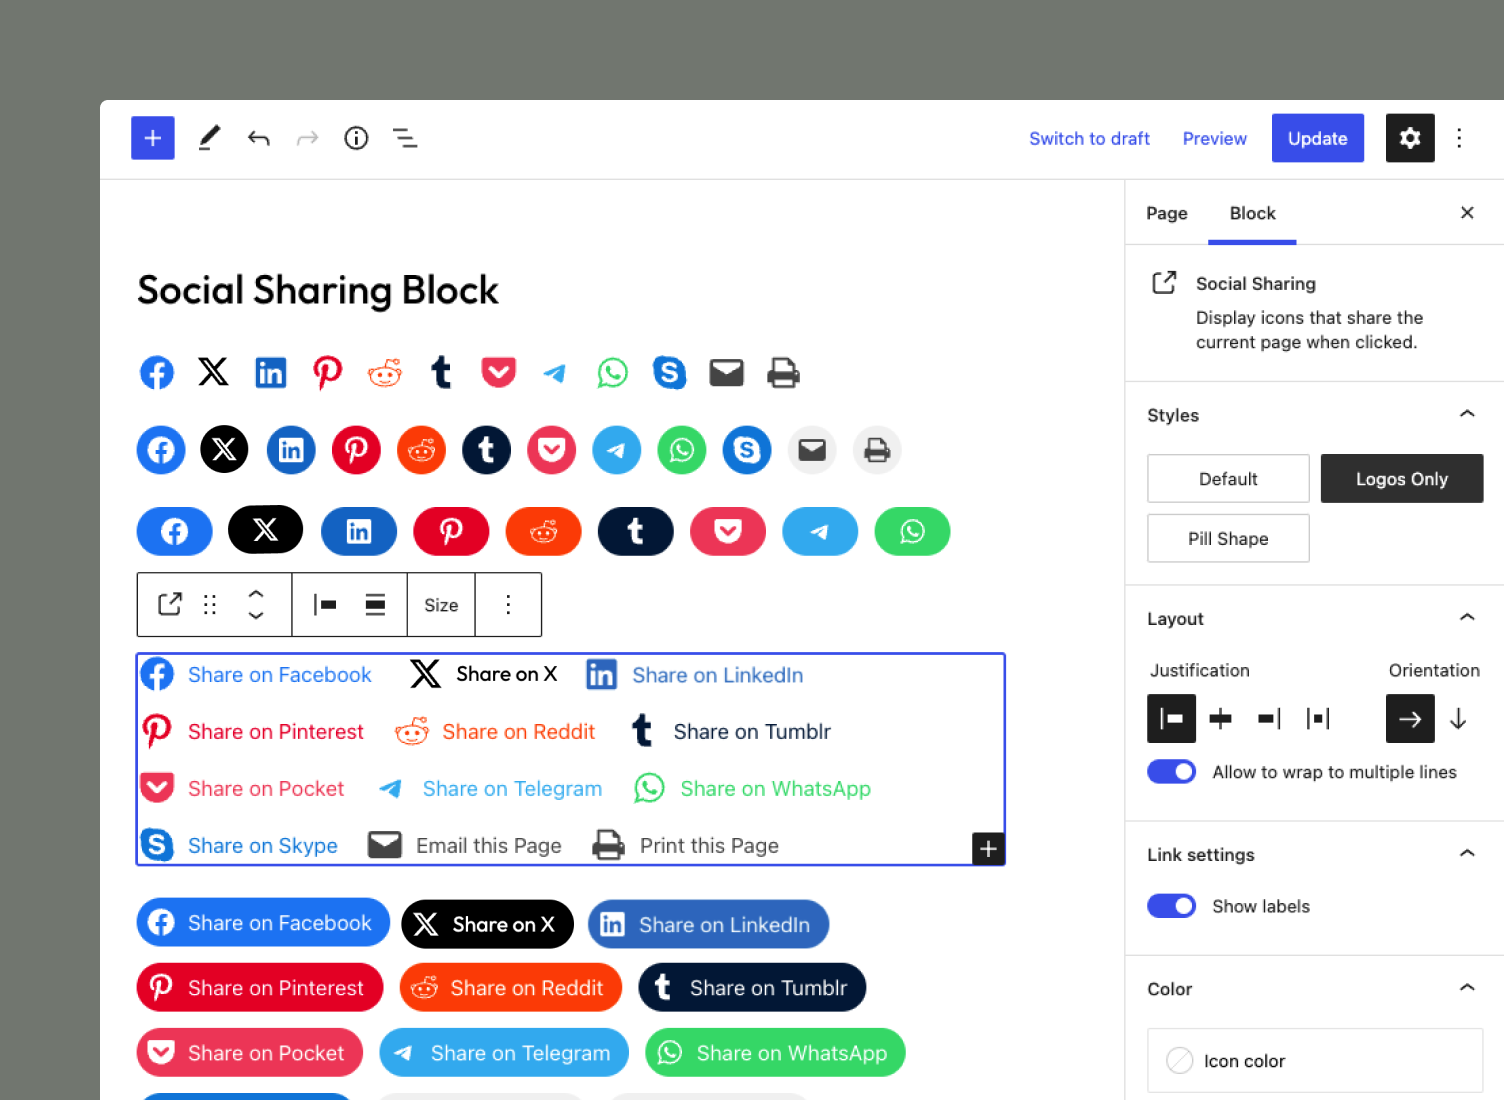 The Social Sharing Block includes three different styles and the ability to show/hide labels.